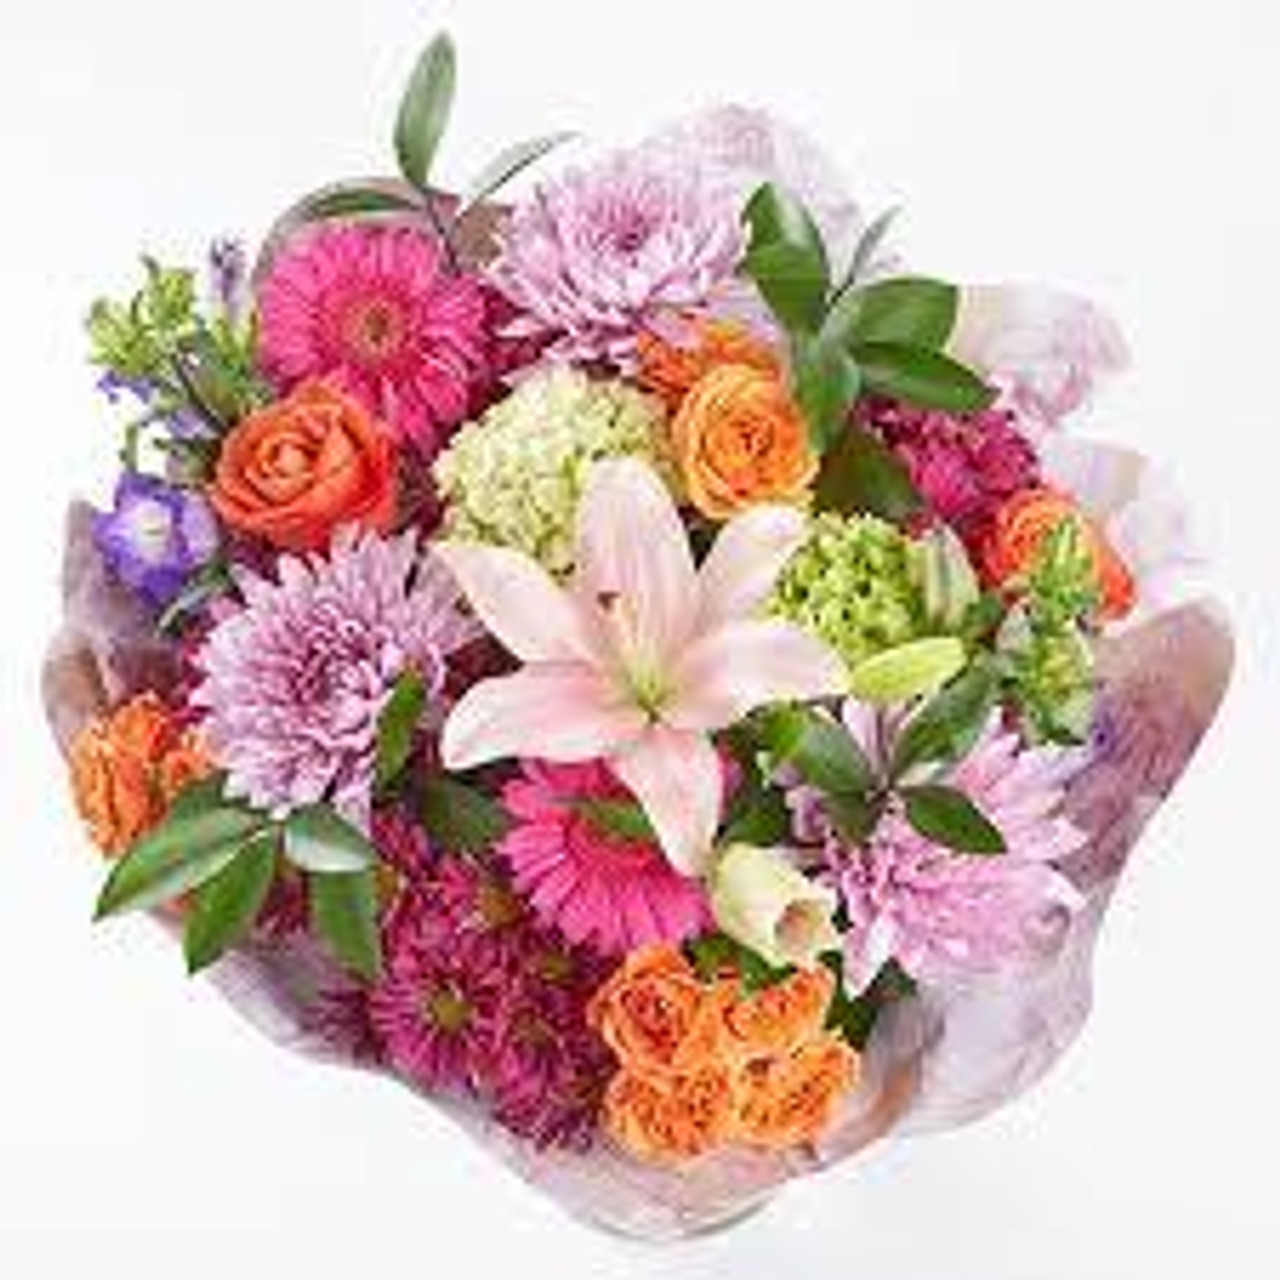 Chappell's Flower bouquet by the Stem Wrapped Spring Selection